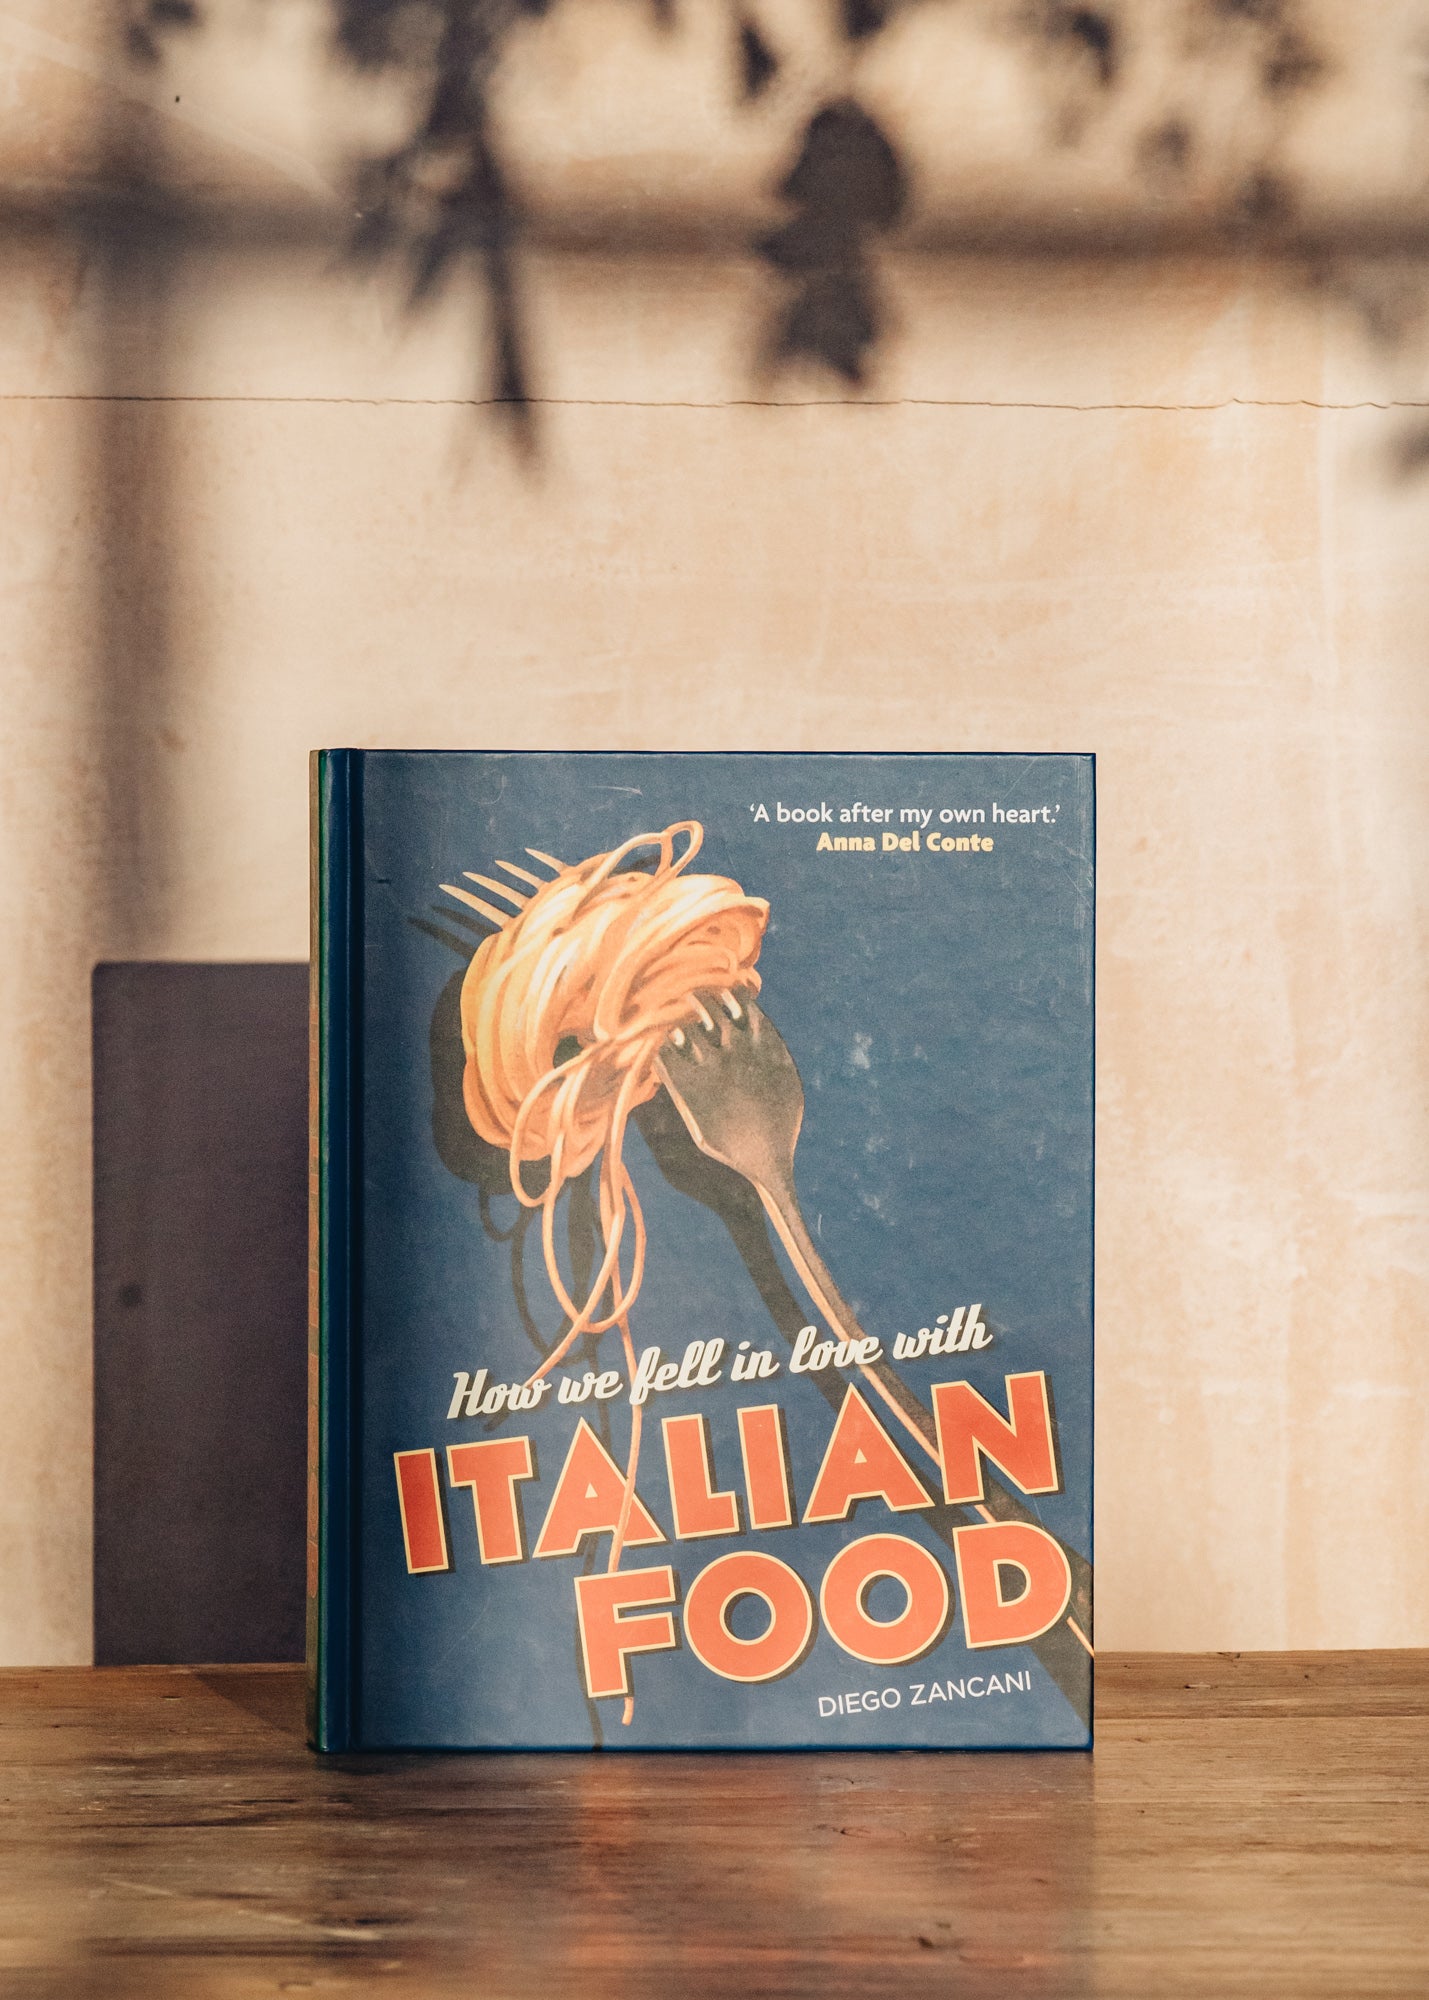 How we fell in love with: Italian Food